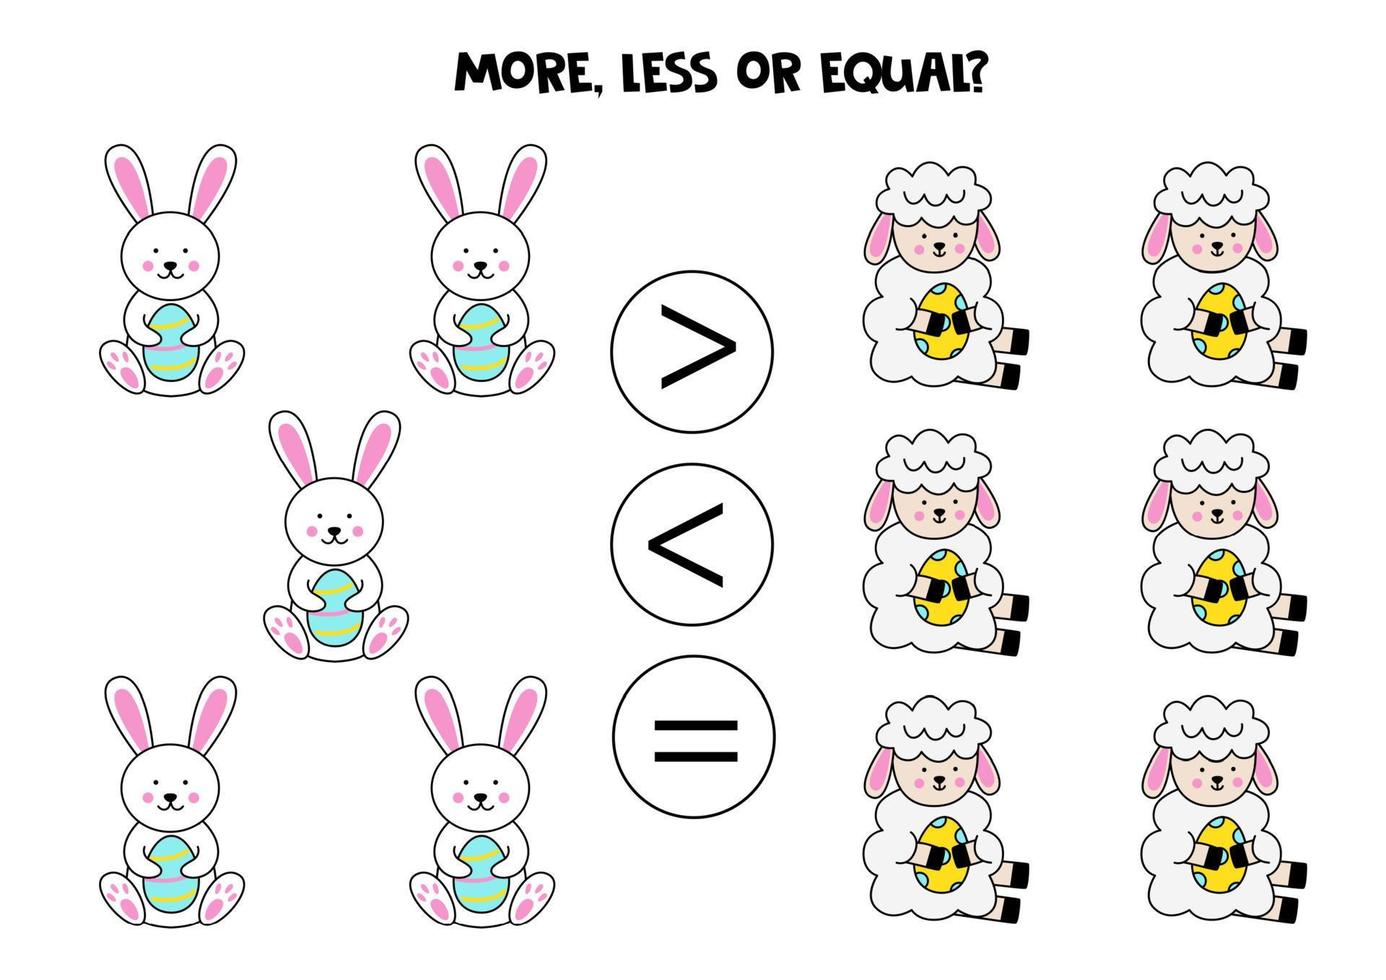 More, less, equal with cartoon Easter lambs and rabbits. vector